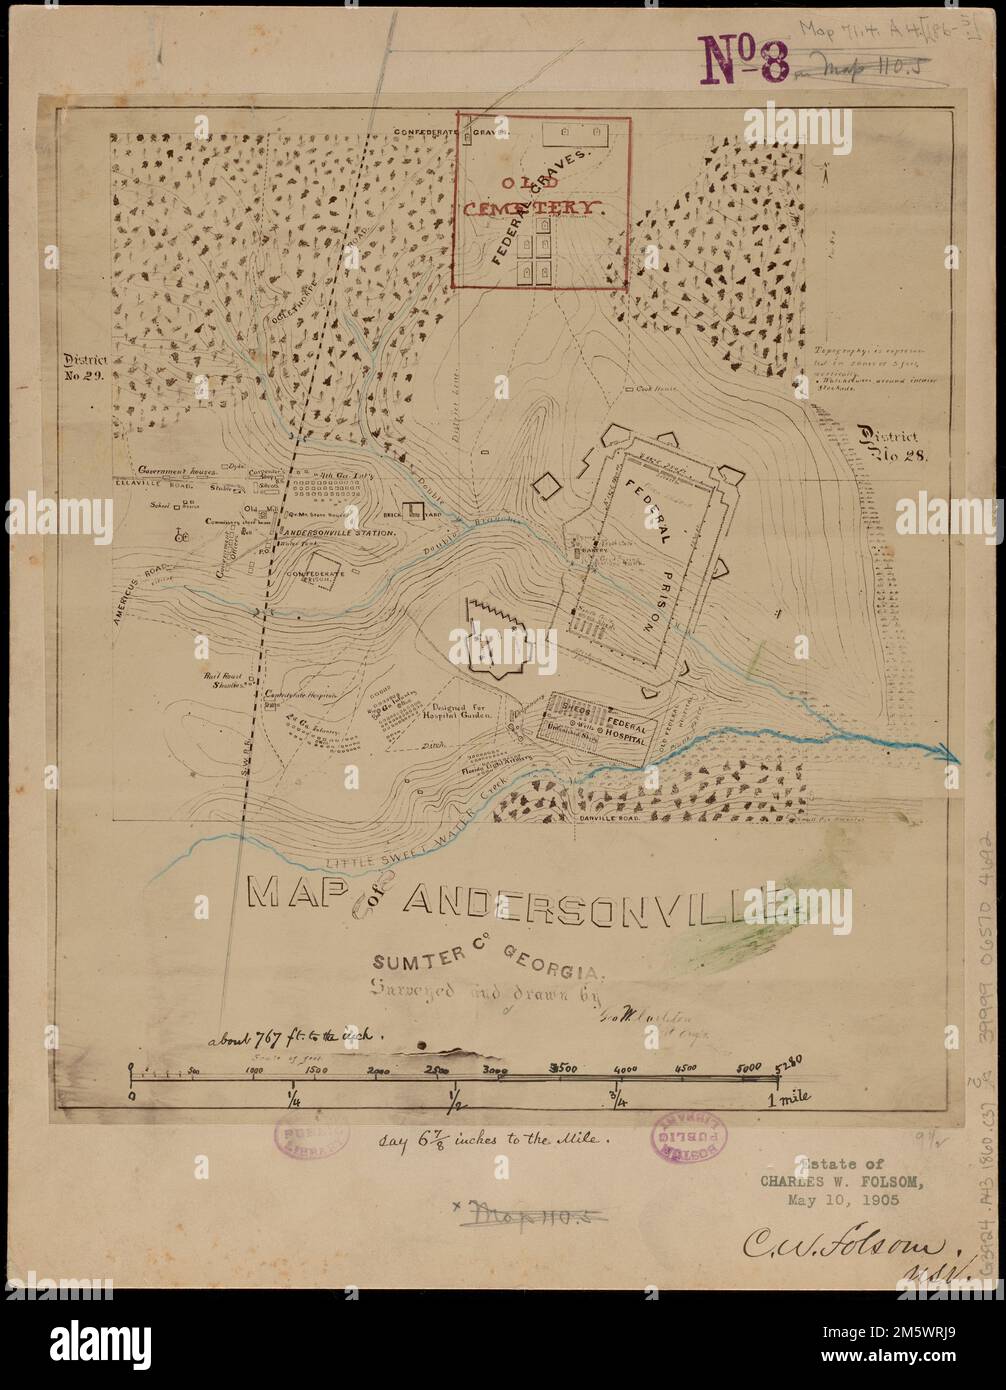 Map of Andersonville, Sumter Co., Georgia. Manuscript map in ink showing Andersonville and the military prison and graveyard used by the confederates during the American Civil War. Relief shown by contours. Carleton sent to Andersonville in May 1865 to produce a topographical survey of the prison and its surroundings, and submitted map and field notes to Major General H. Wilson before his release in June 1865.... , Georgia  , Sumter  ,county   , Andersonville National Historical Site Georgia  , Sumter  ,county   , Andersonville Stock Photo